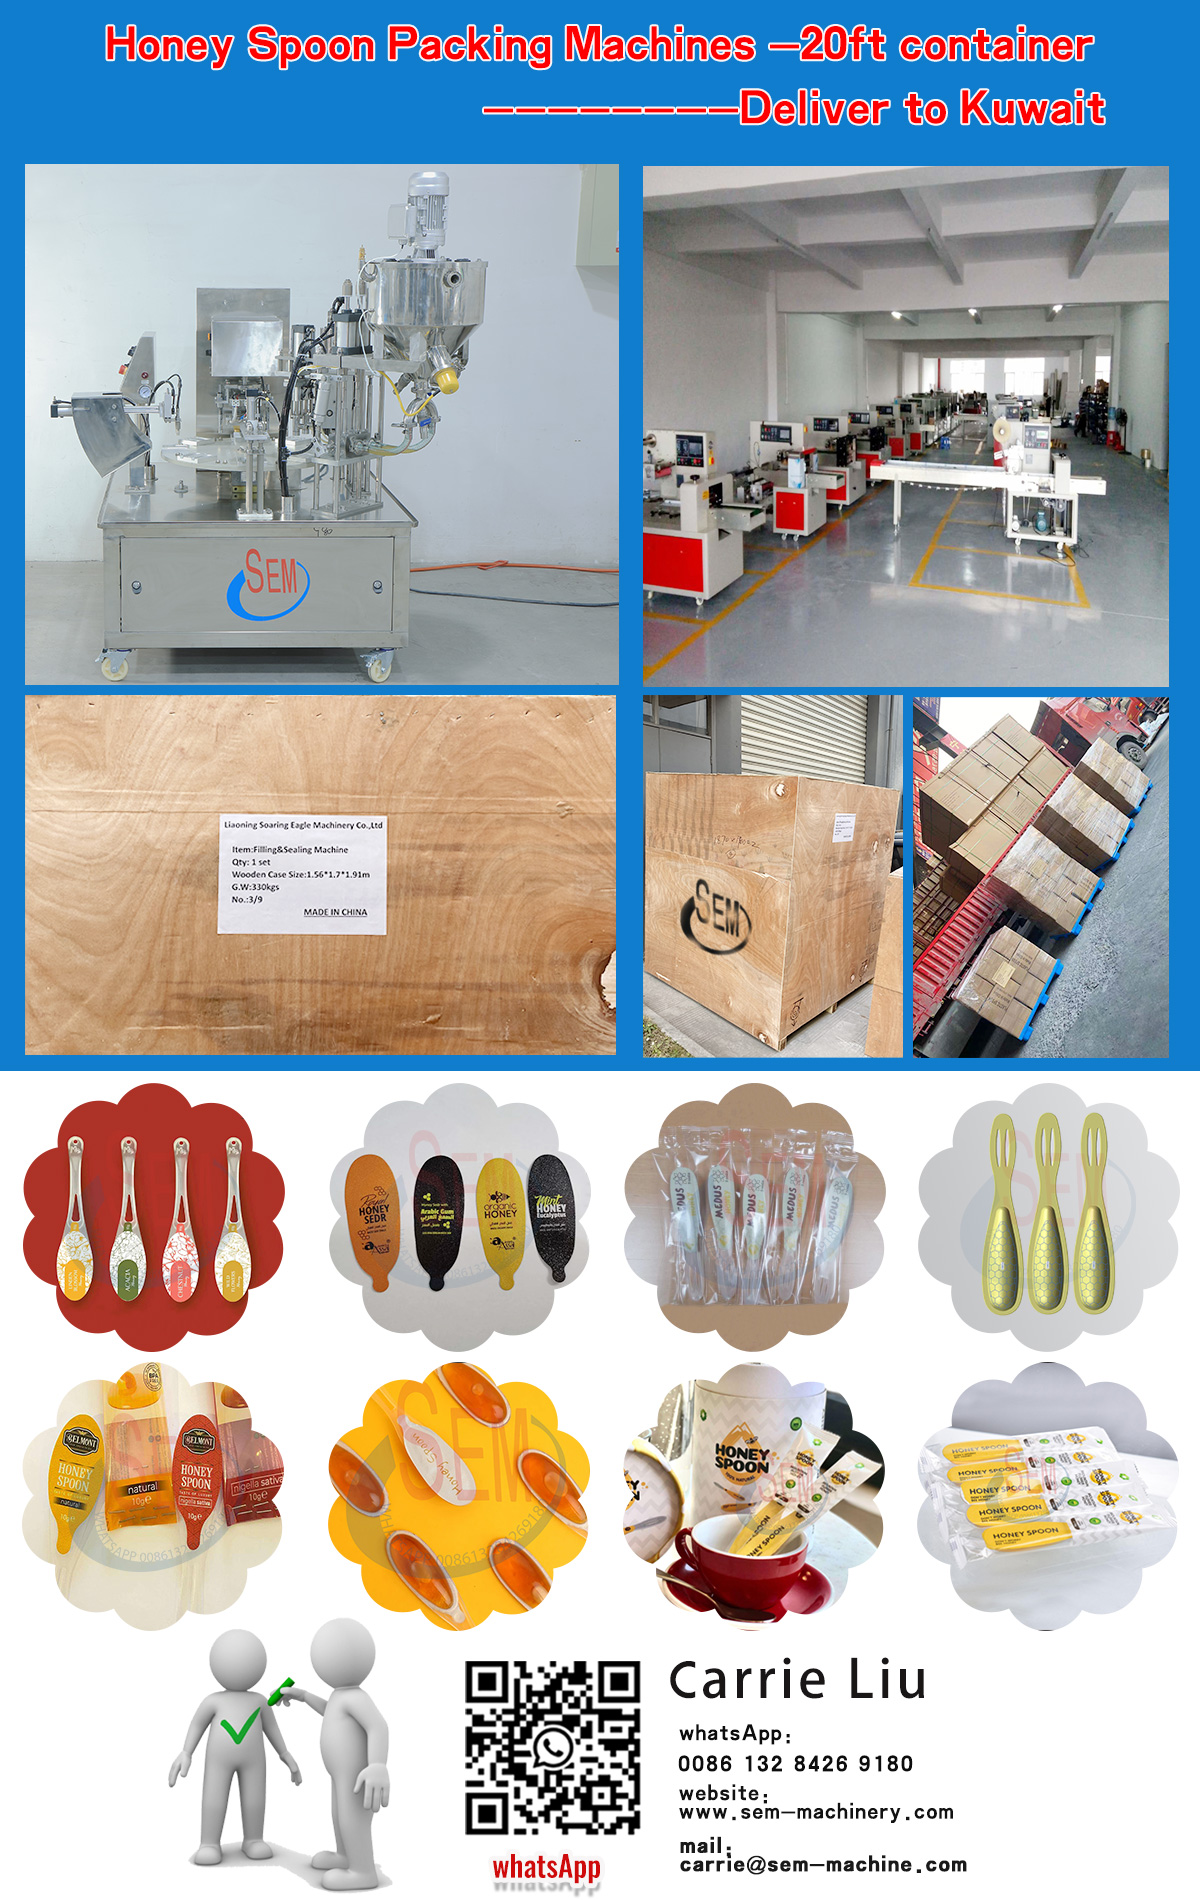 Honey spoon packing machine 20ft container——delivered to Kuwait